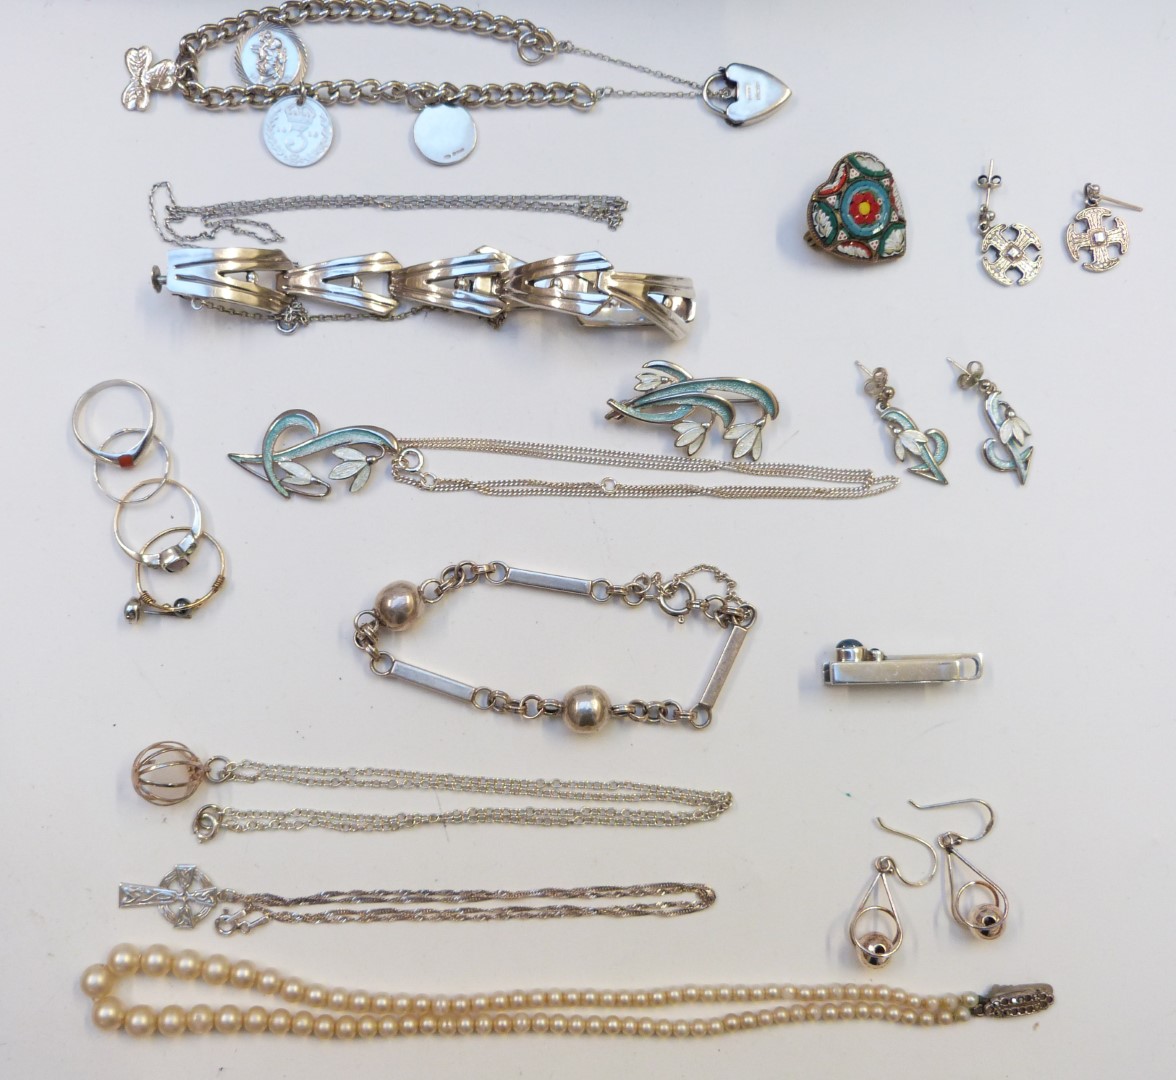 A collection of silver jewellery including earrings, rings, bracelets, pendants, charms etc - Image 2 of 4